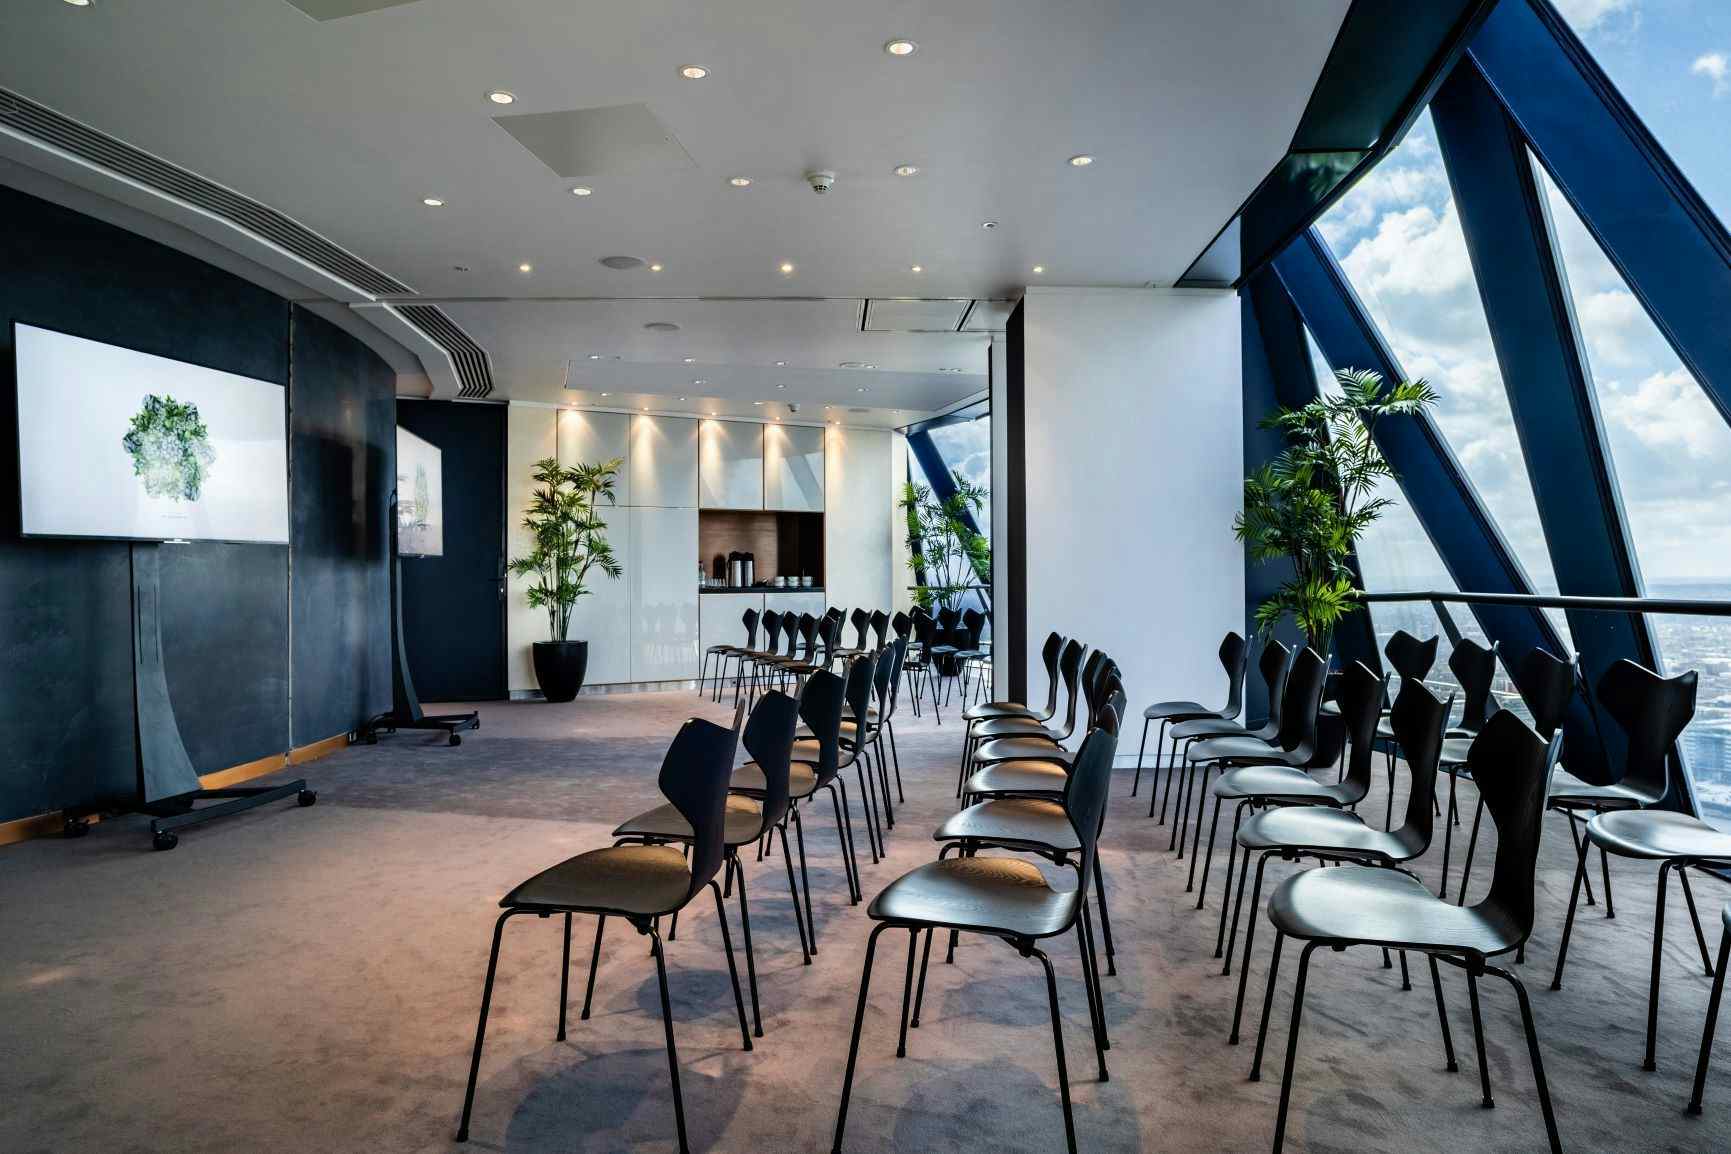 Exclusive Hire of Level 38, Searcys at the Gherkin